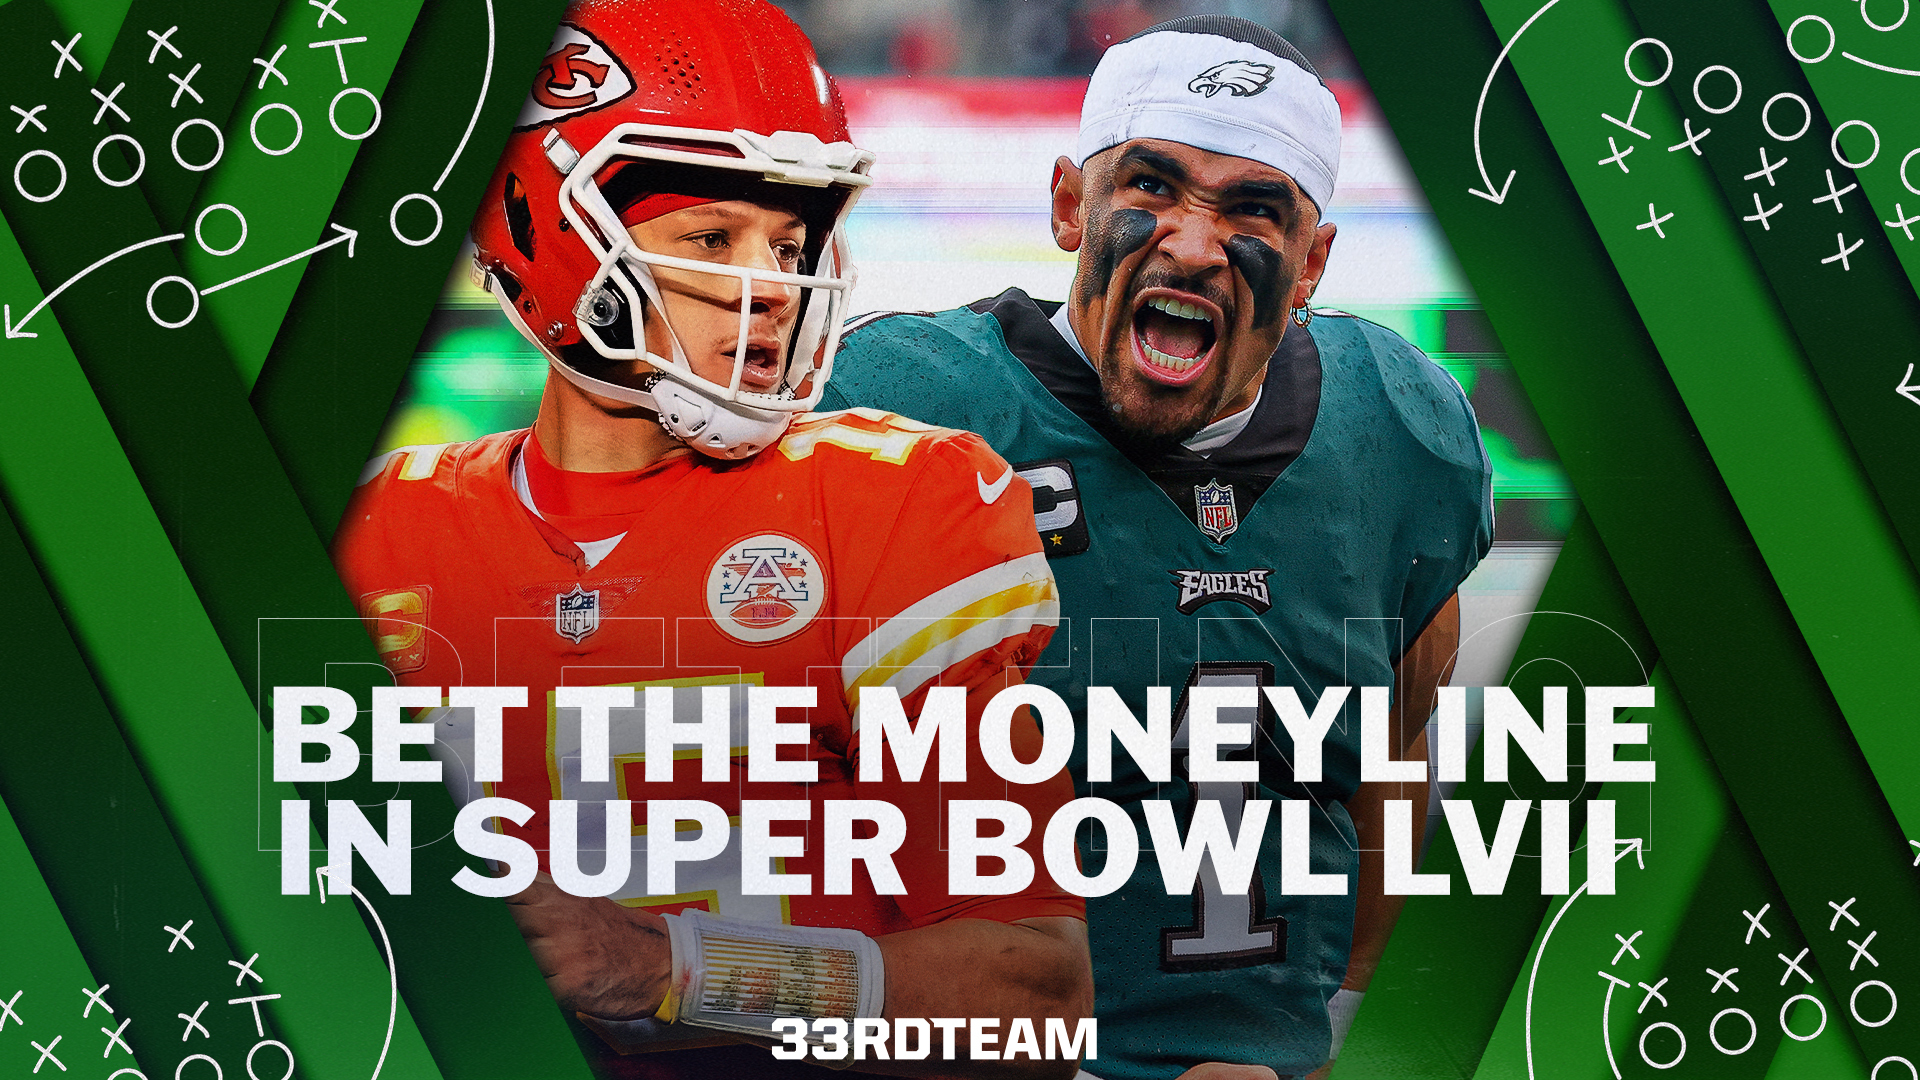 Why You Should Bet the Super Bowl Moneyline